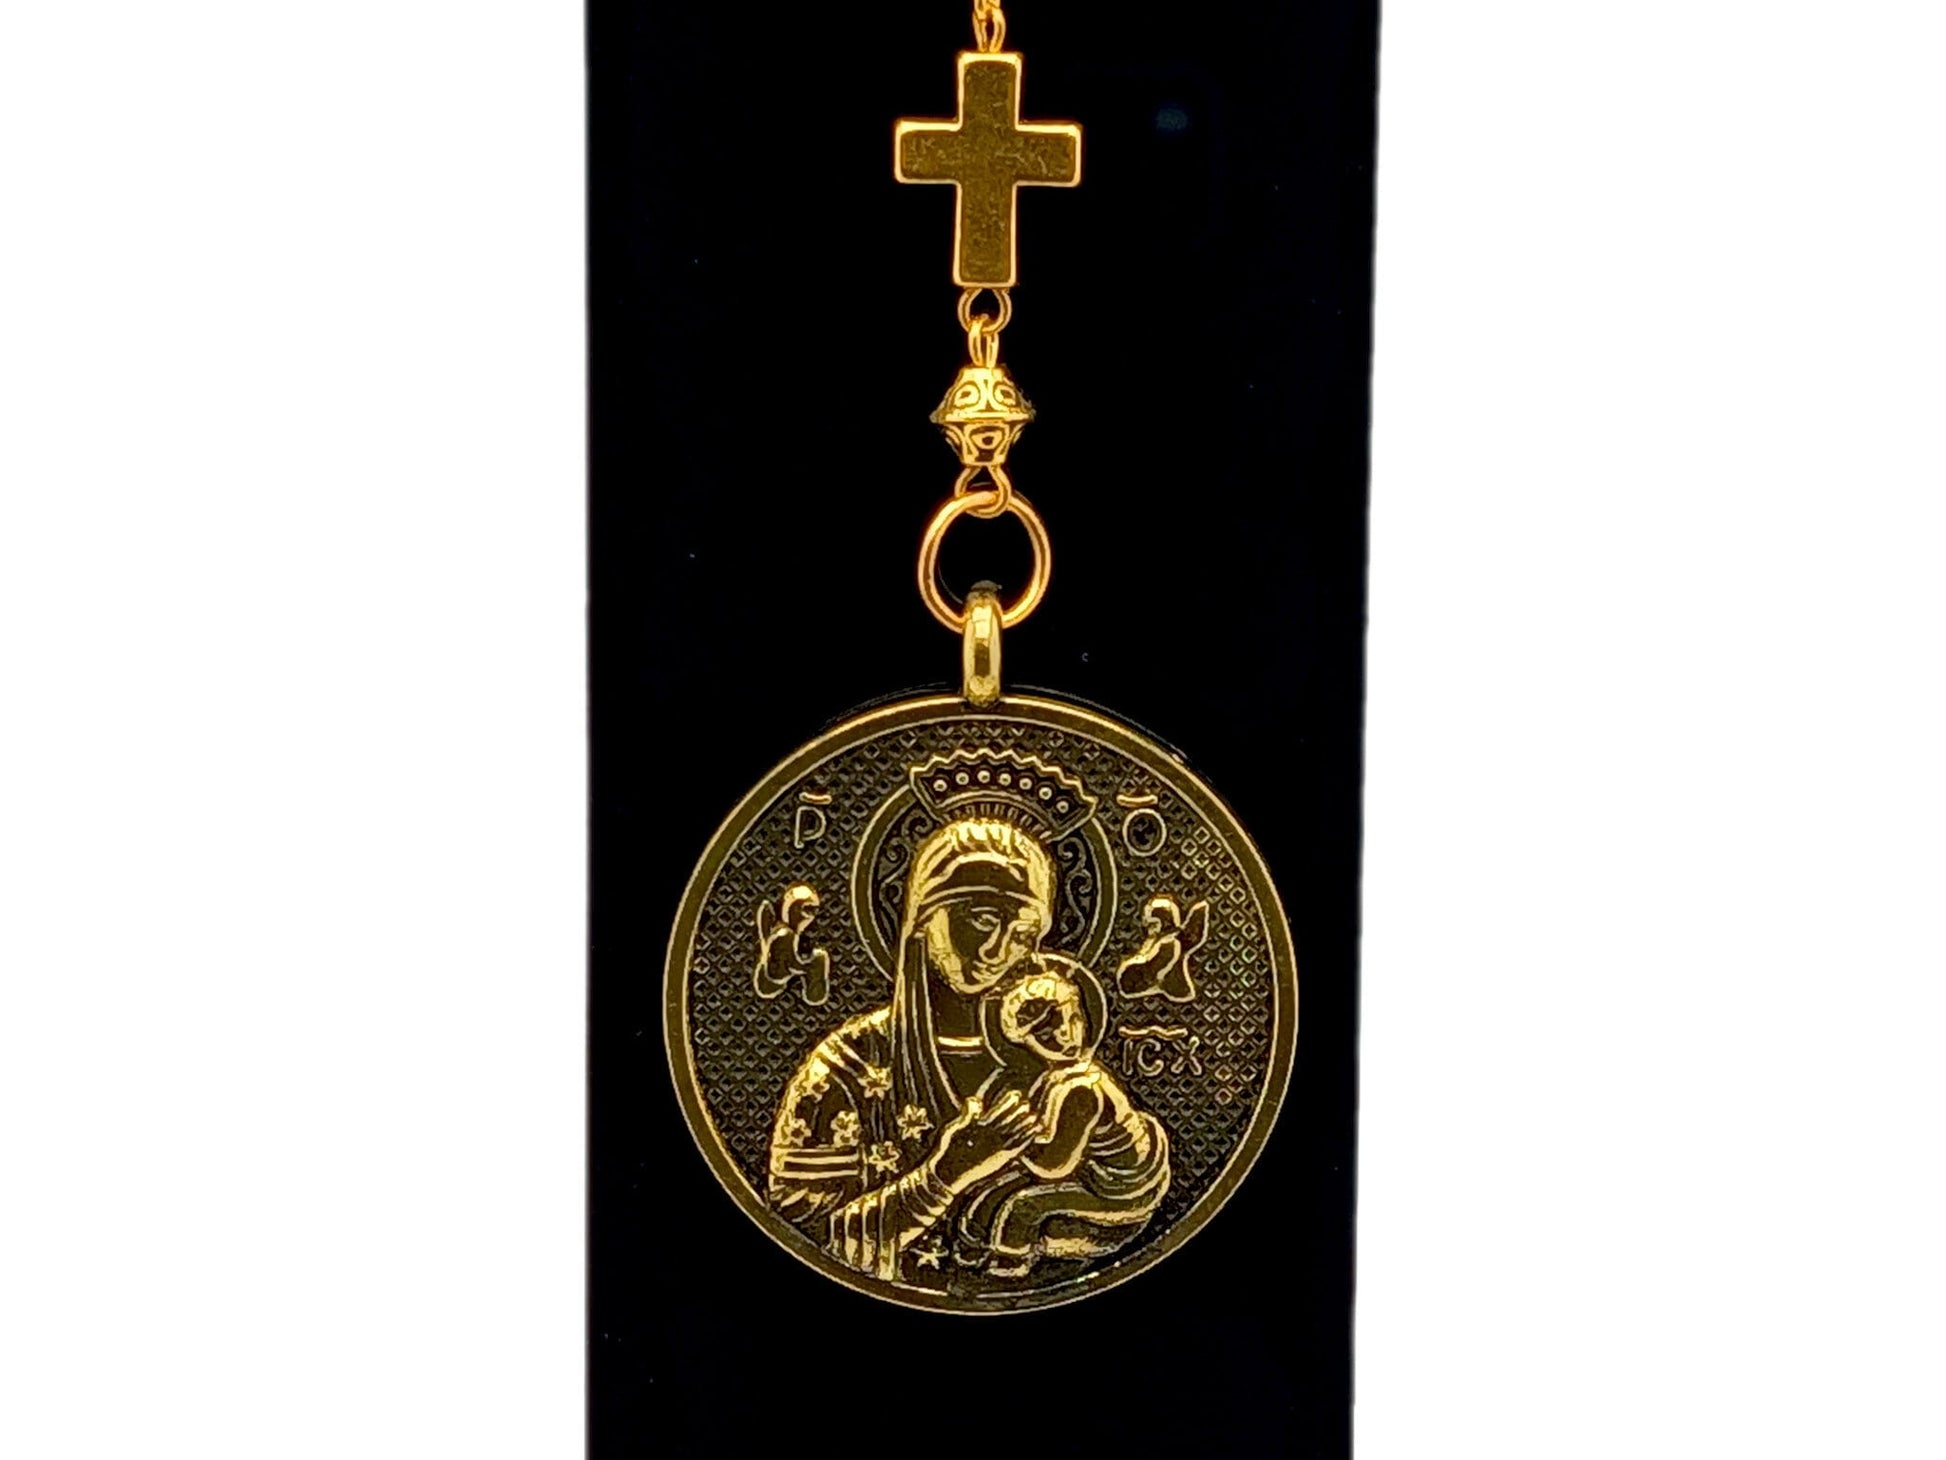 Antique gold Our Lady of Perpetual Help unique rosary beads purse clip key chain with linking gold cross.